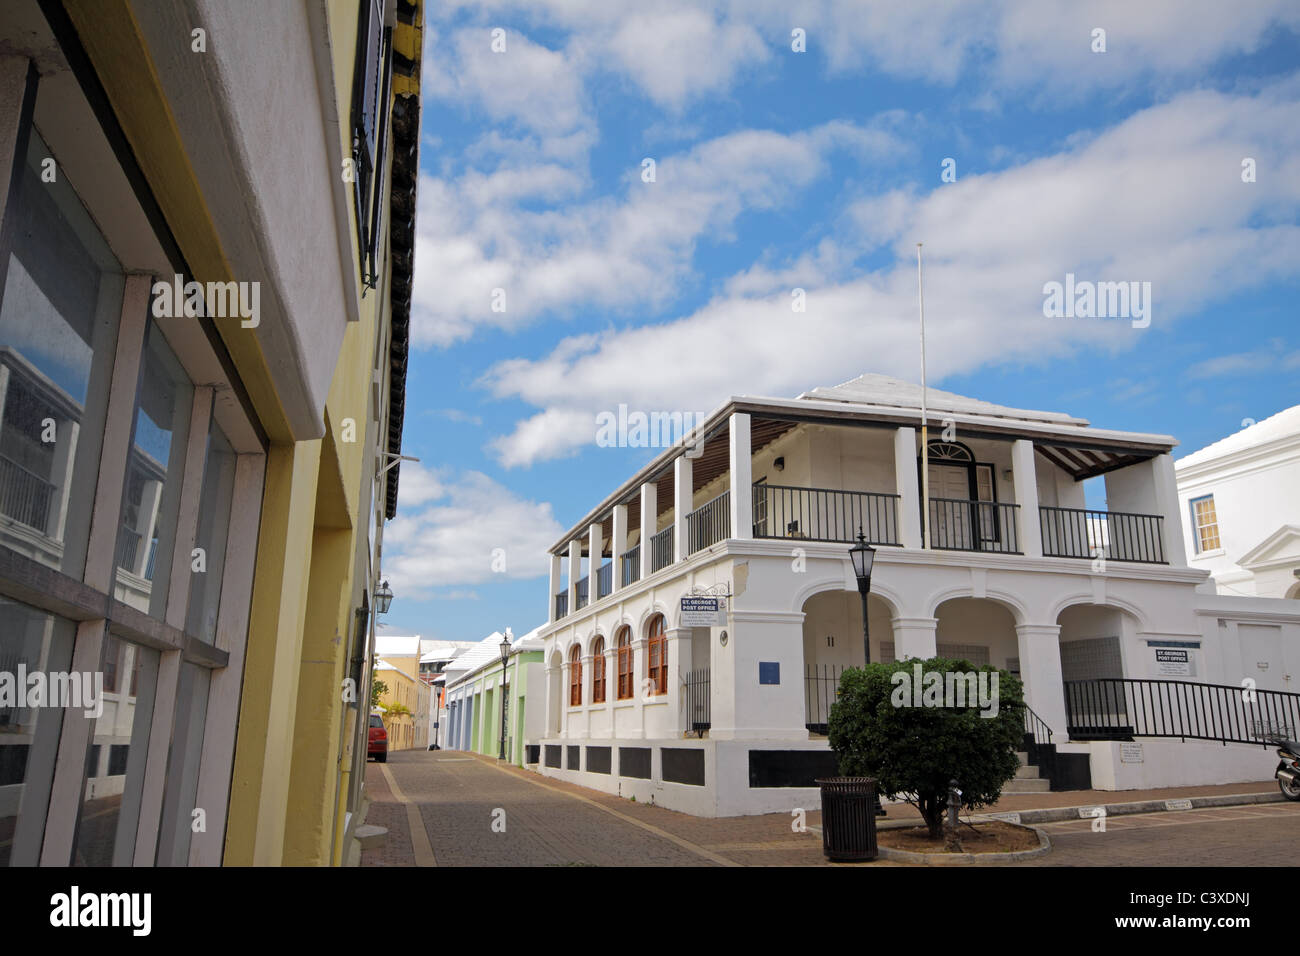 Street view in the town of St. George, Bermuda Stock Photo